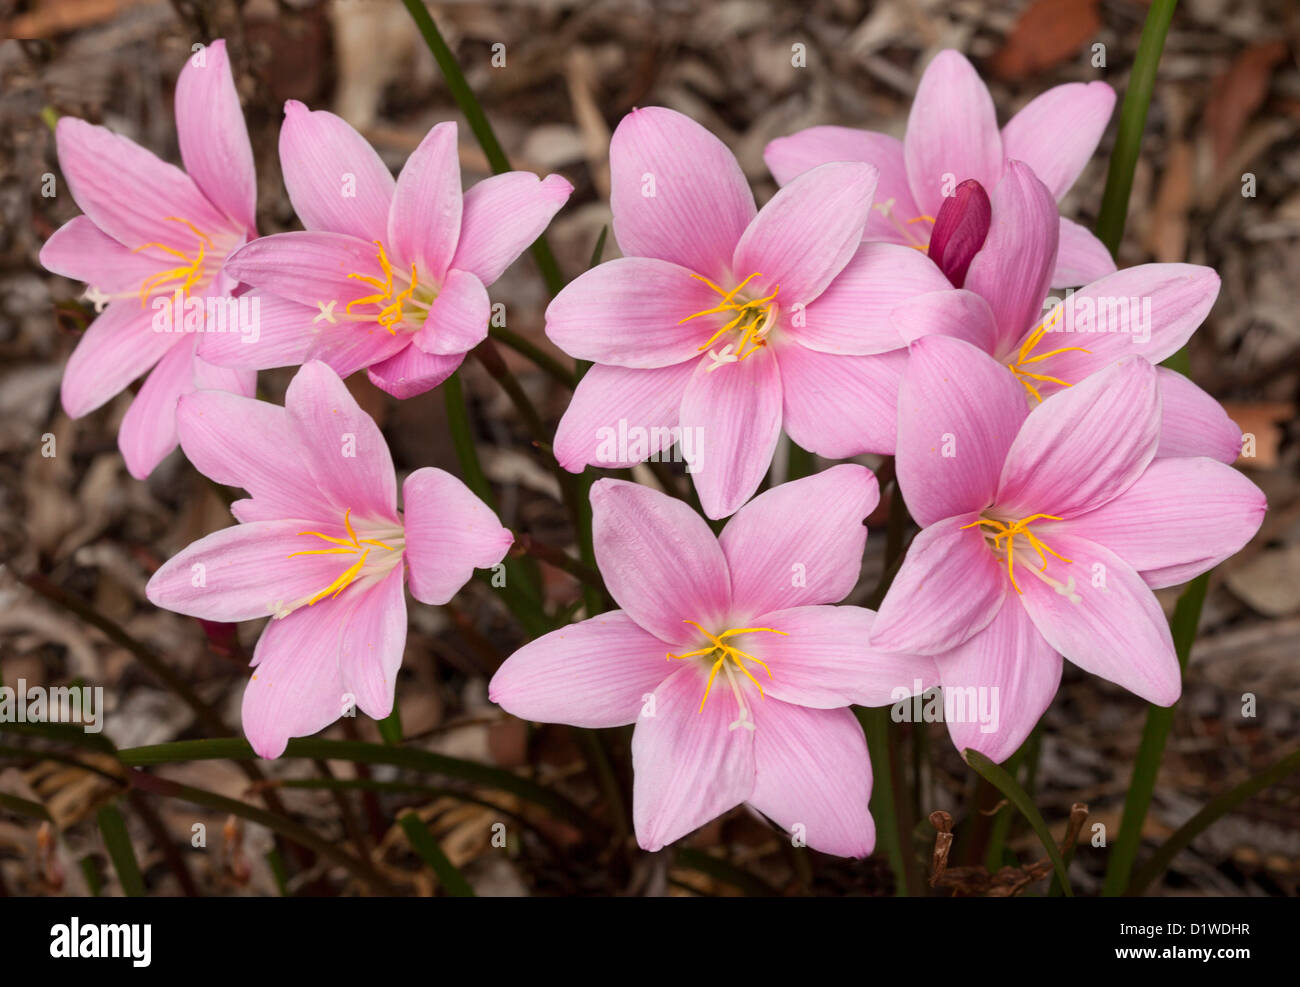 Cluster of bright pink flowers of Zephyranthes grandiflora syn rosea Stock Photo